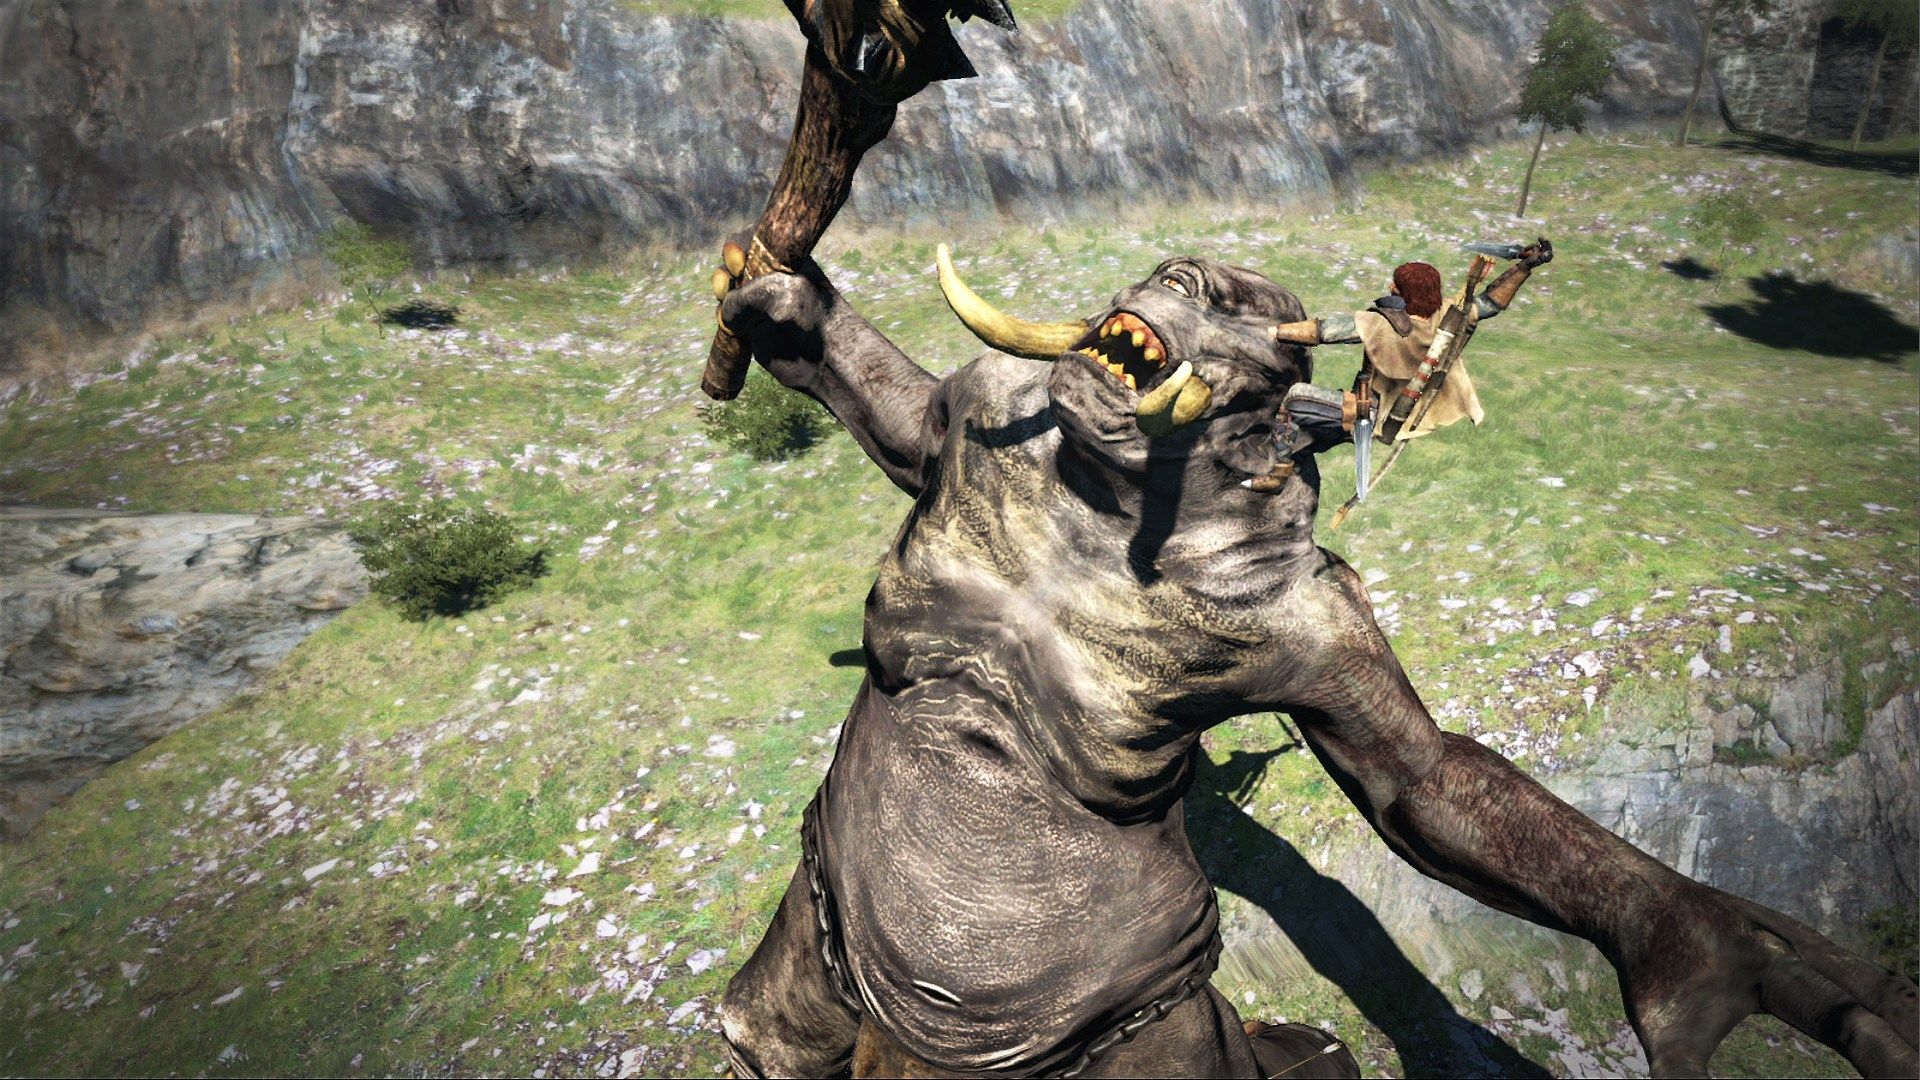 A character climbingup to a Cyclops in a open field, ready to stab the beast on its eye.